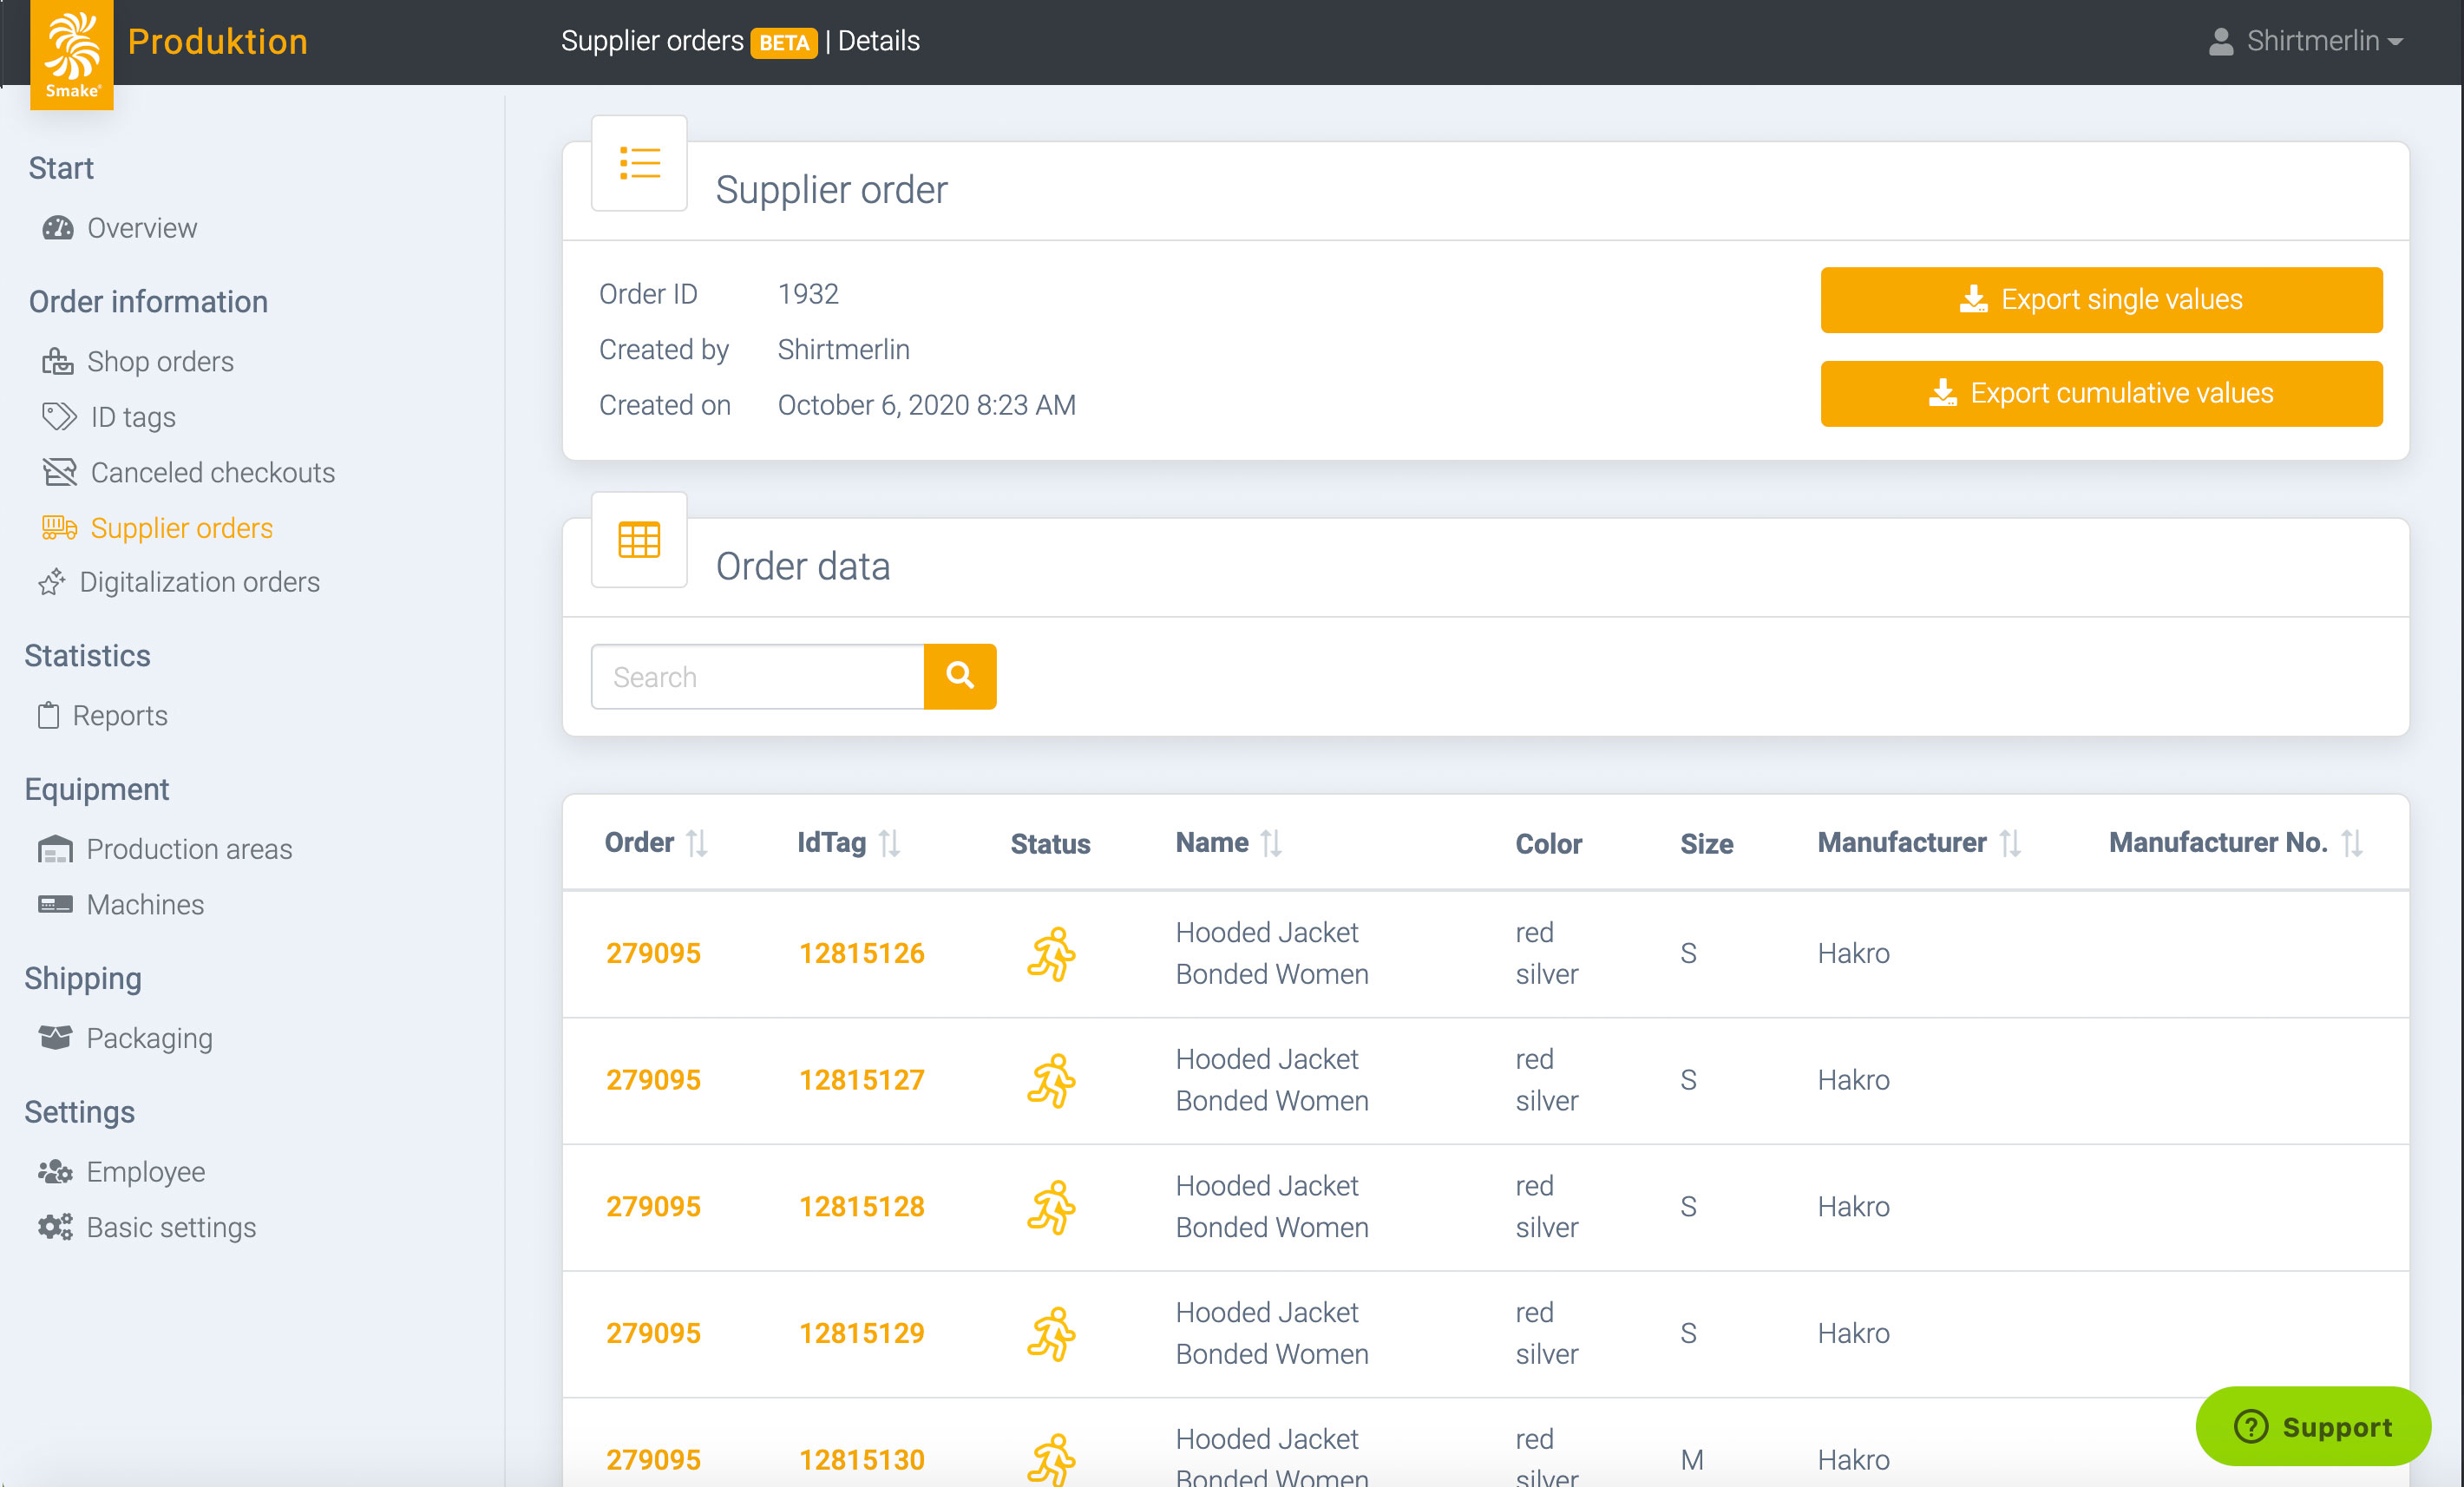 smake_production-admin_supplier-orders-overview.jpg